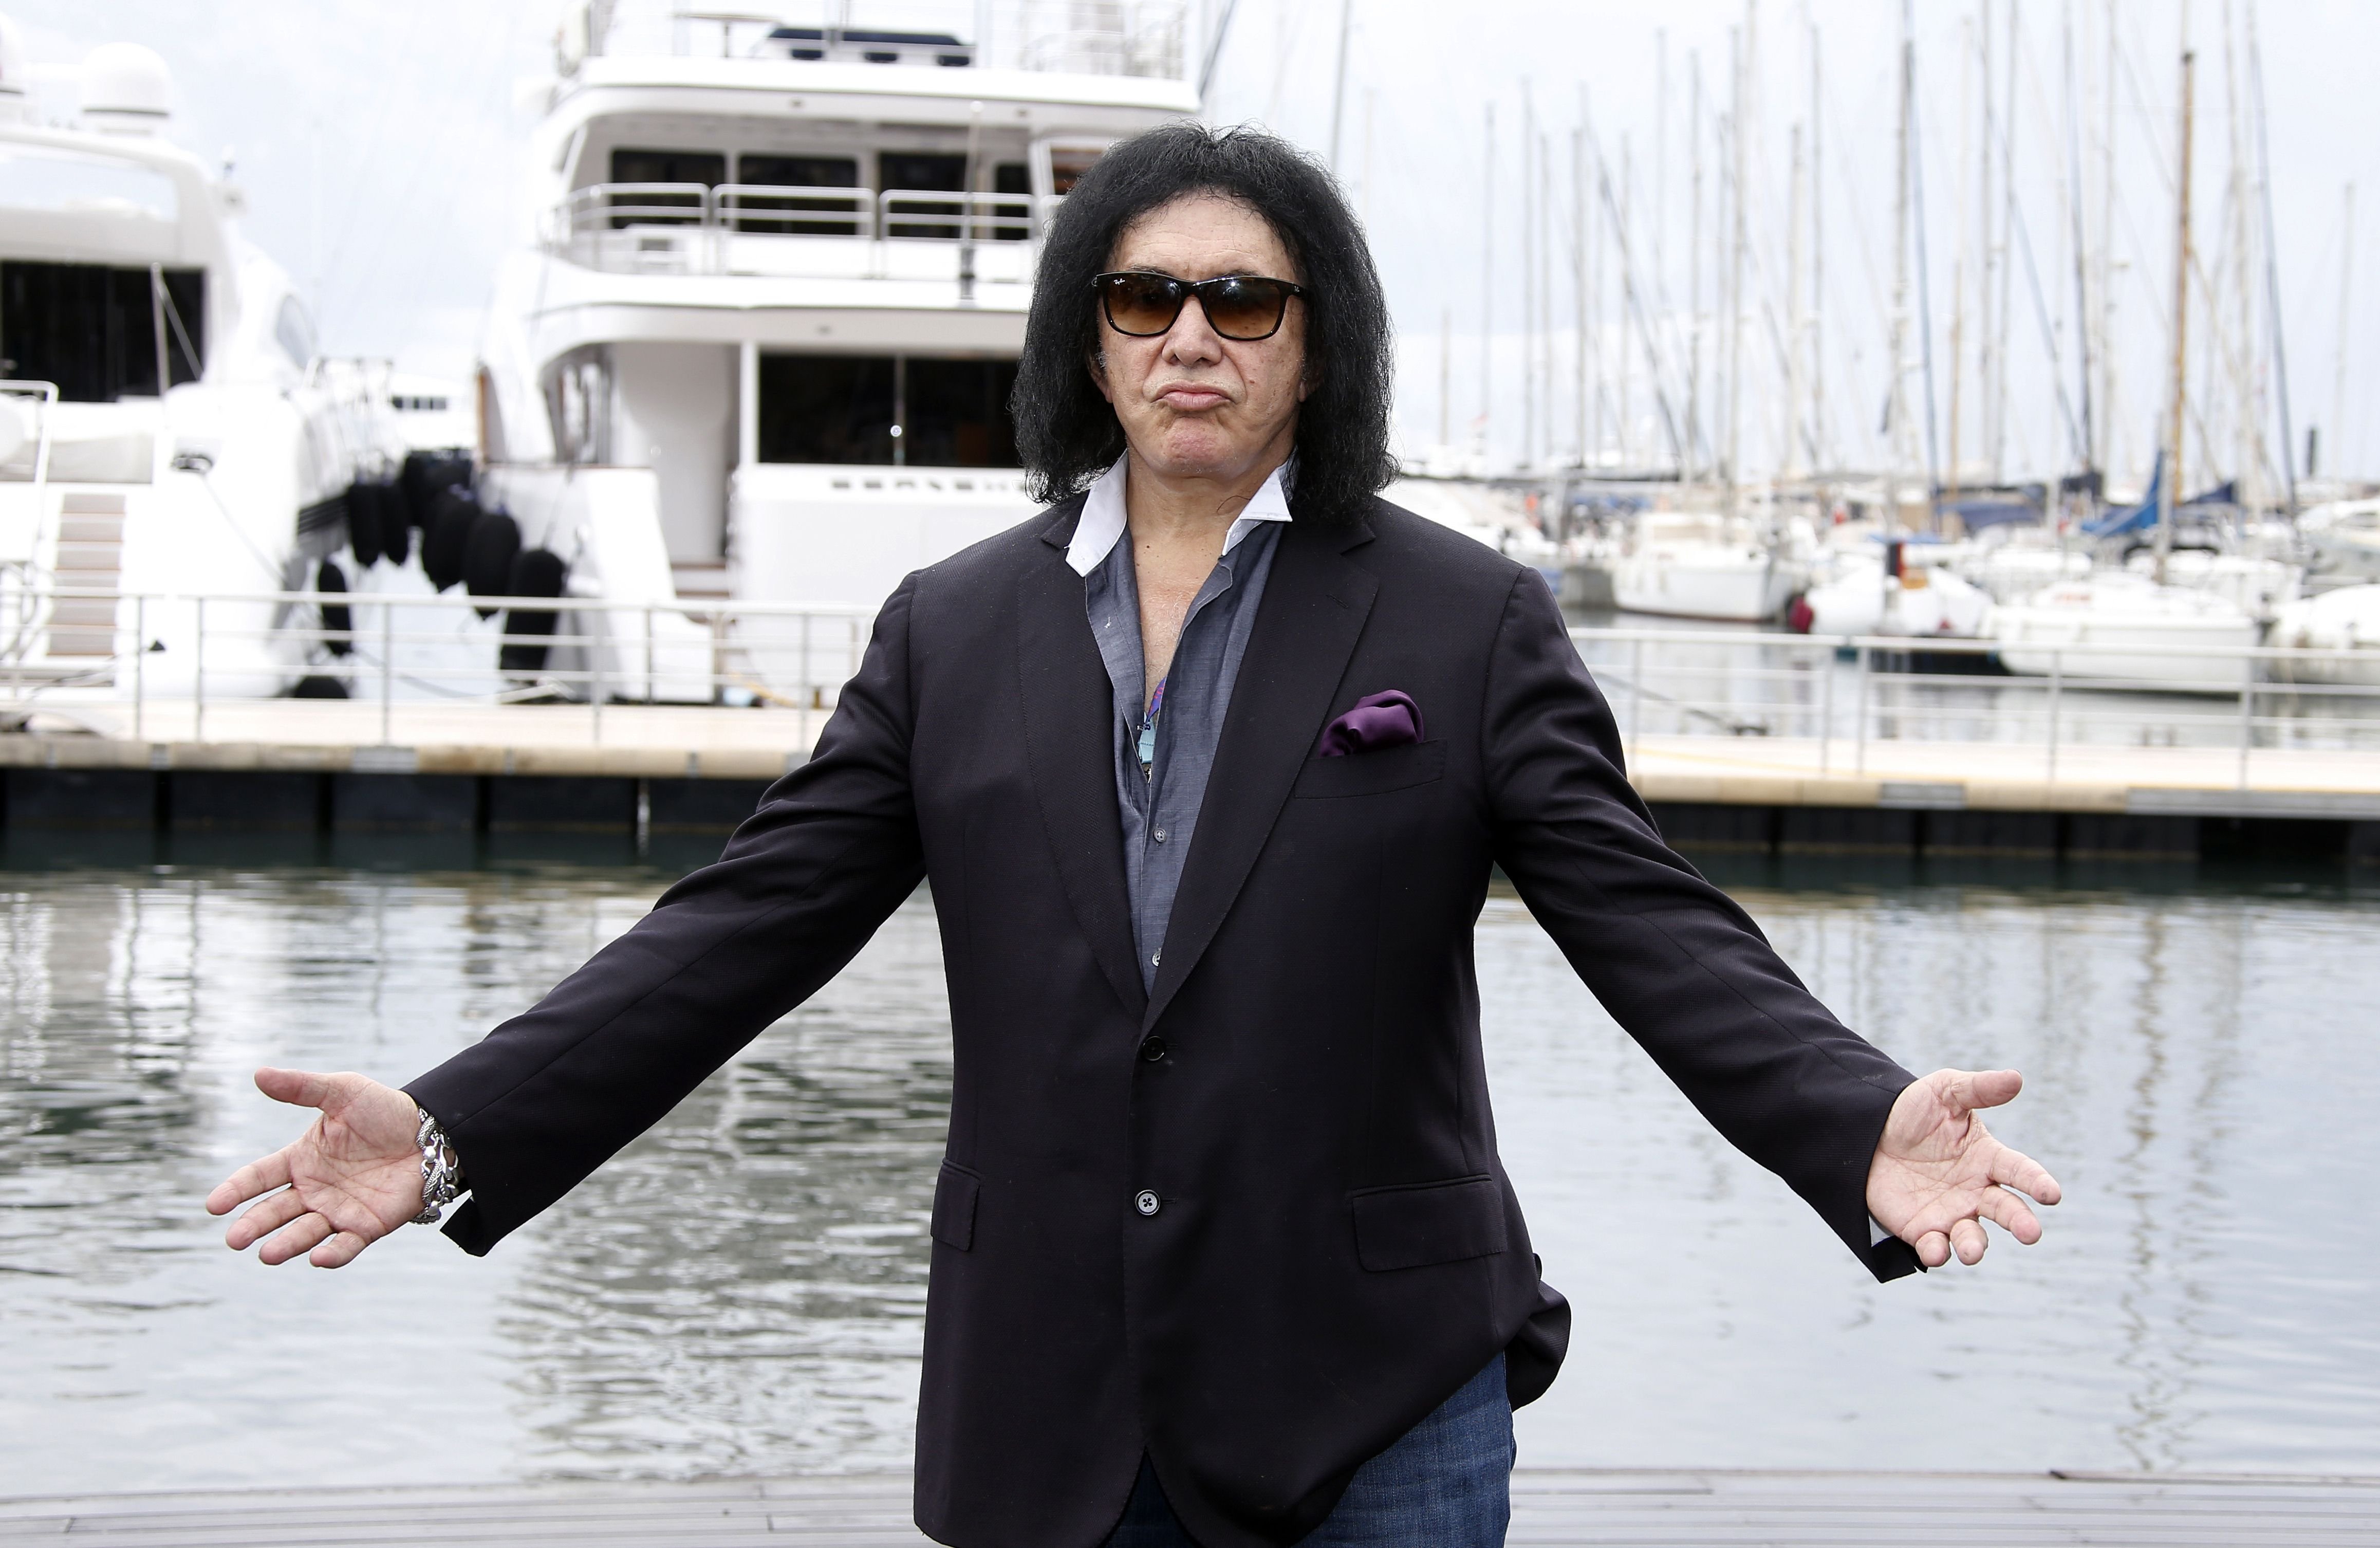 Israeli-US actor and musician, member of the band Kiss, Gene Simmons poses during a photocall for the TV serie "Gene Simmons" as part of the MIPCOM, on Oct. 14, 2014 in Cannes, southeastern France.